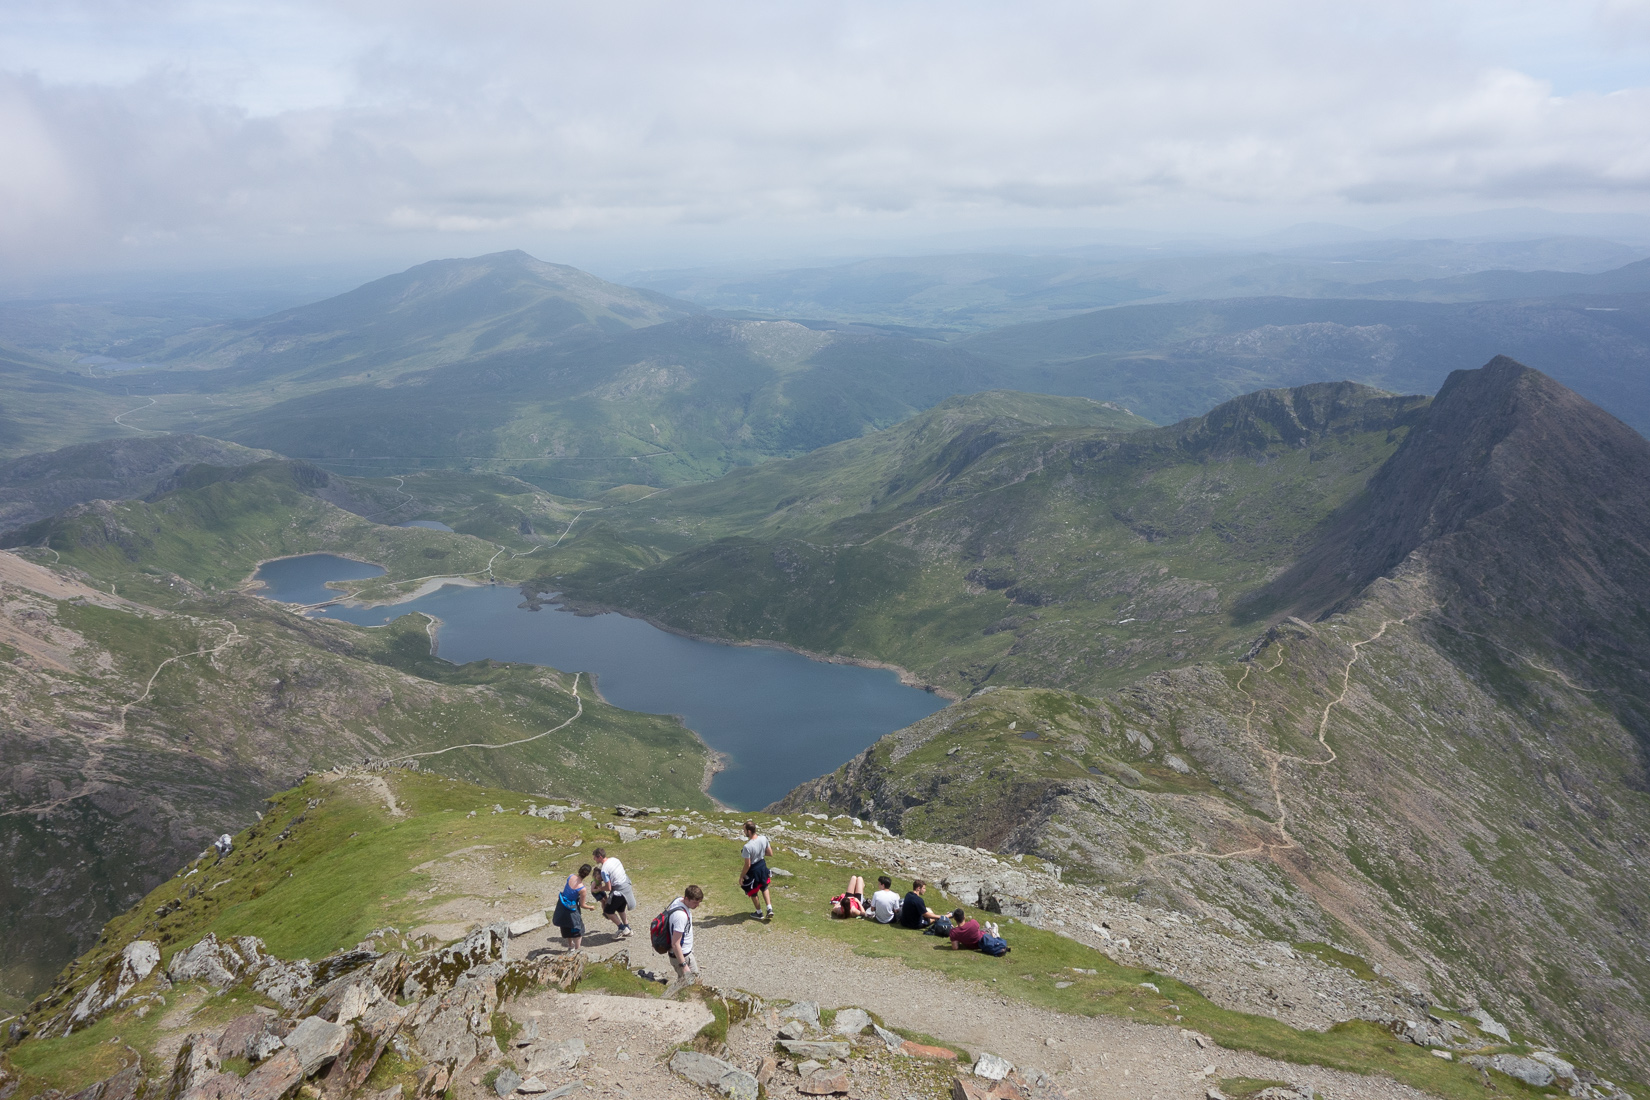 View from the top of Snowdon